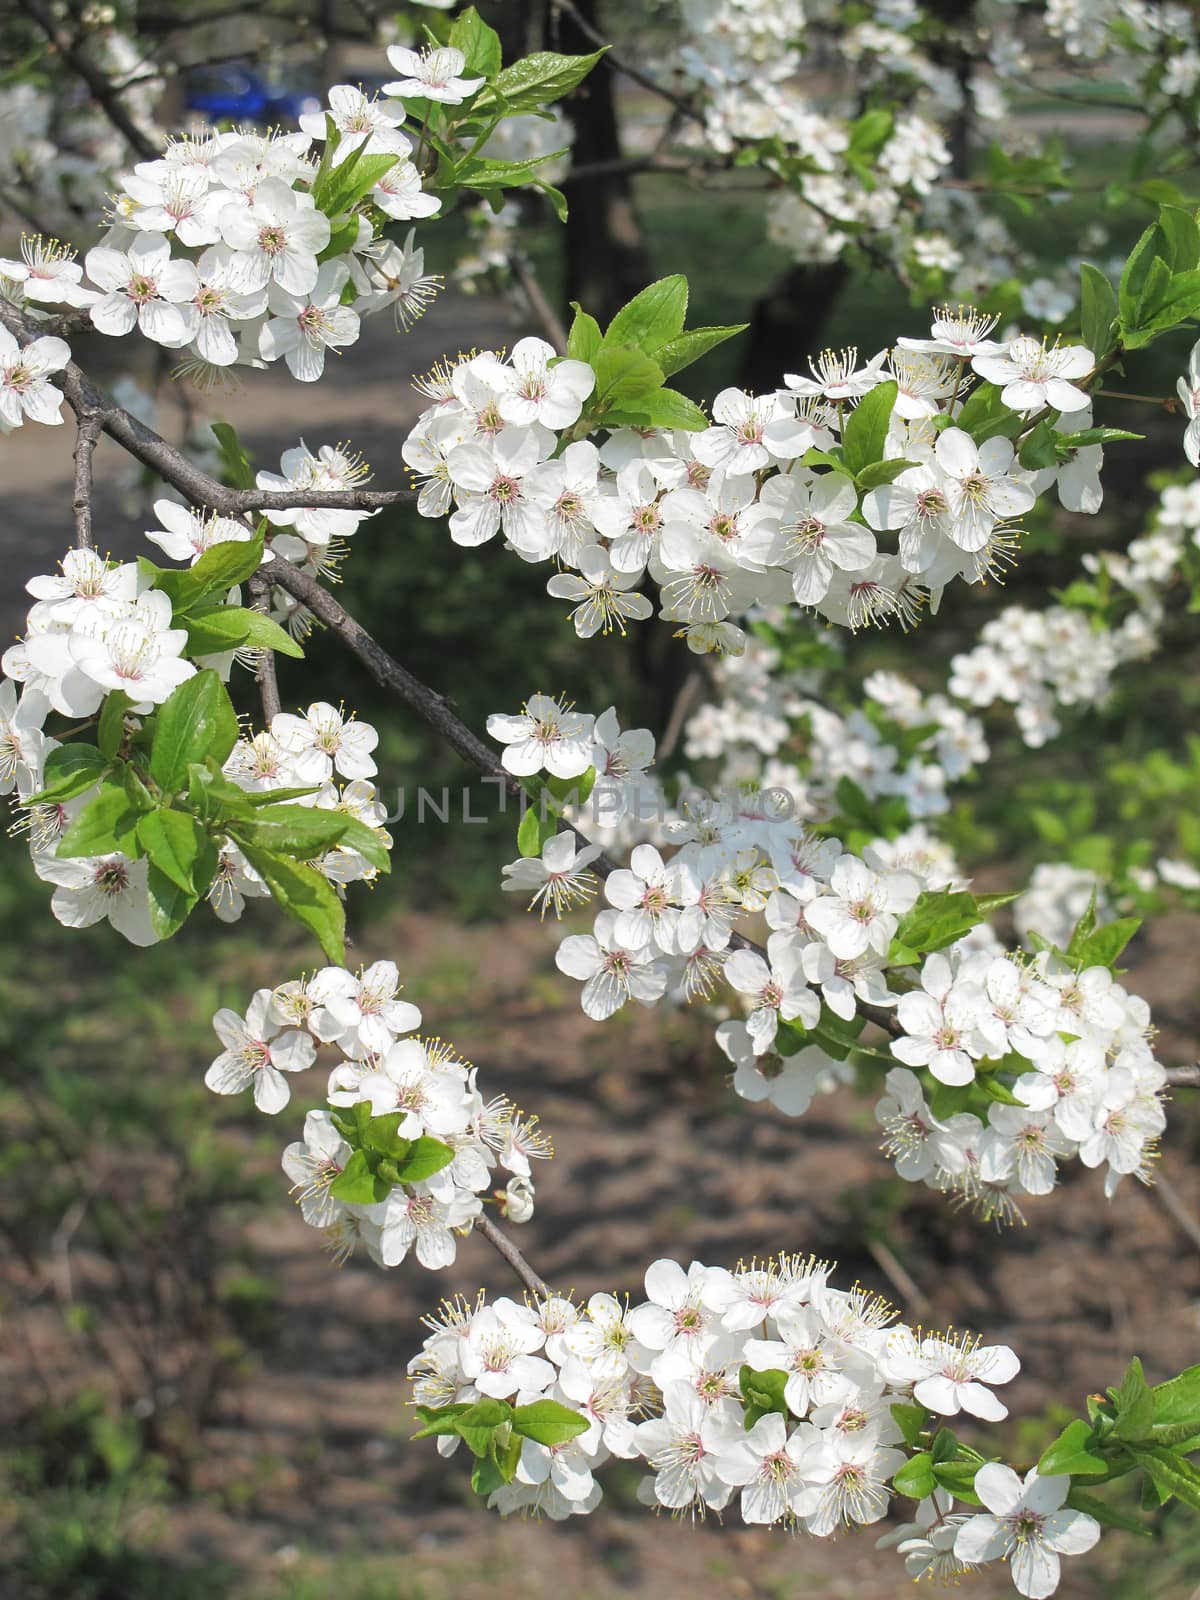 Flowering spring cherry with beautiful white flowers and green leaves by Adamchuk